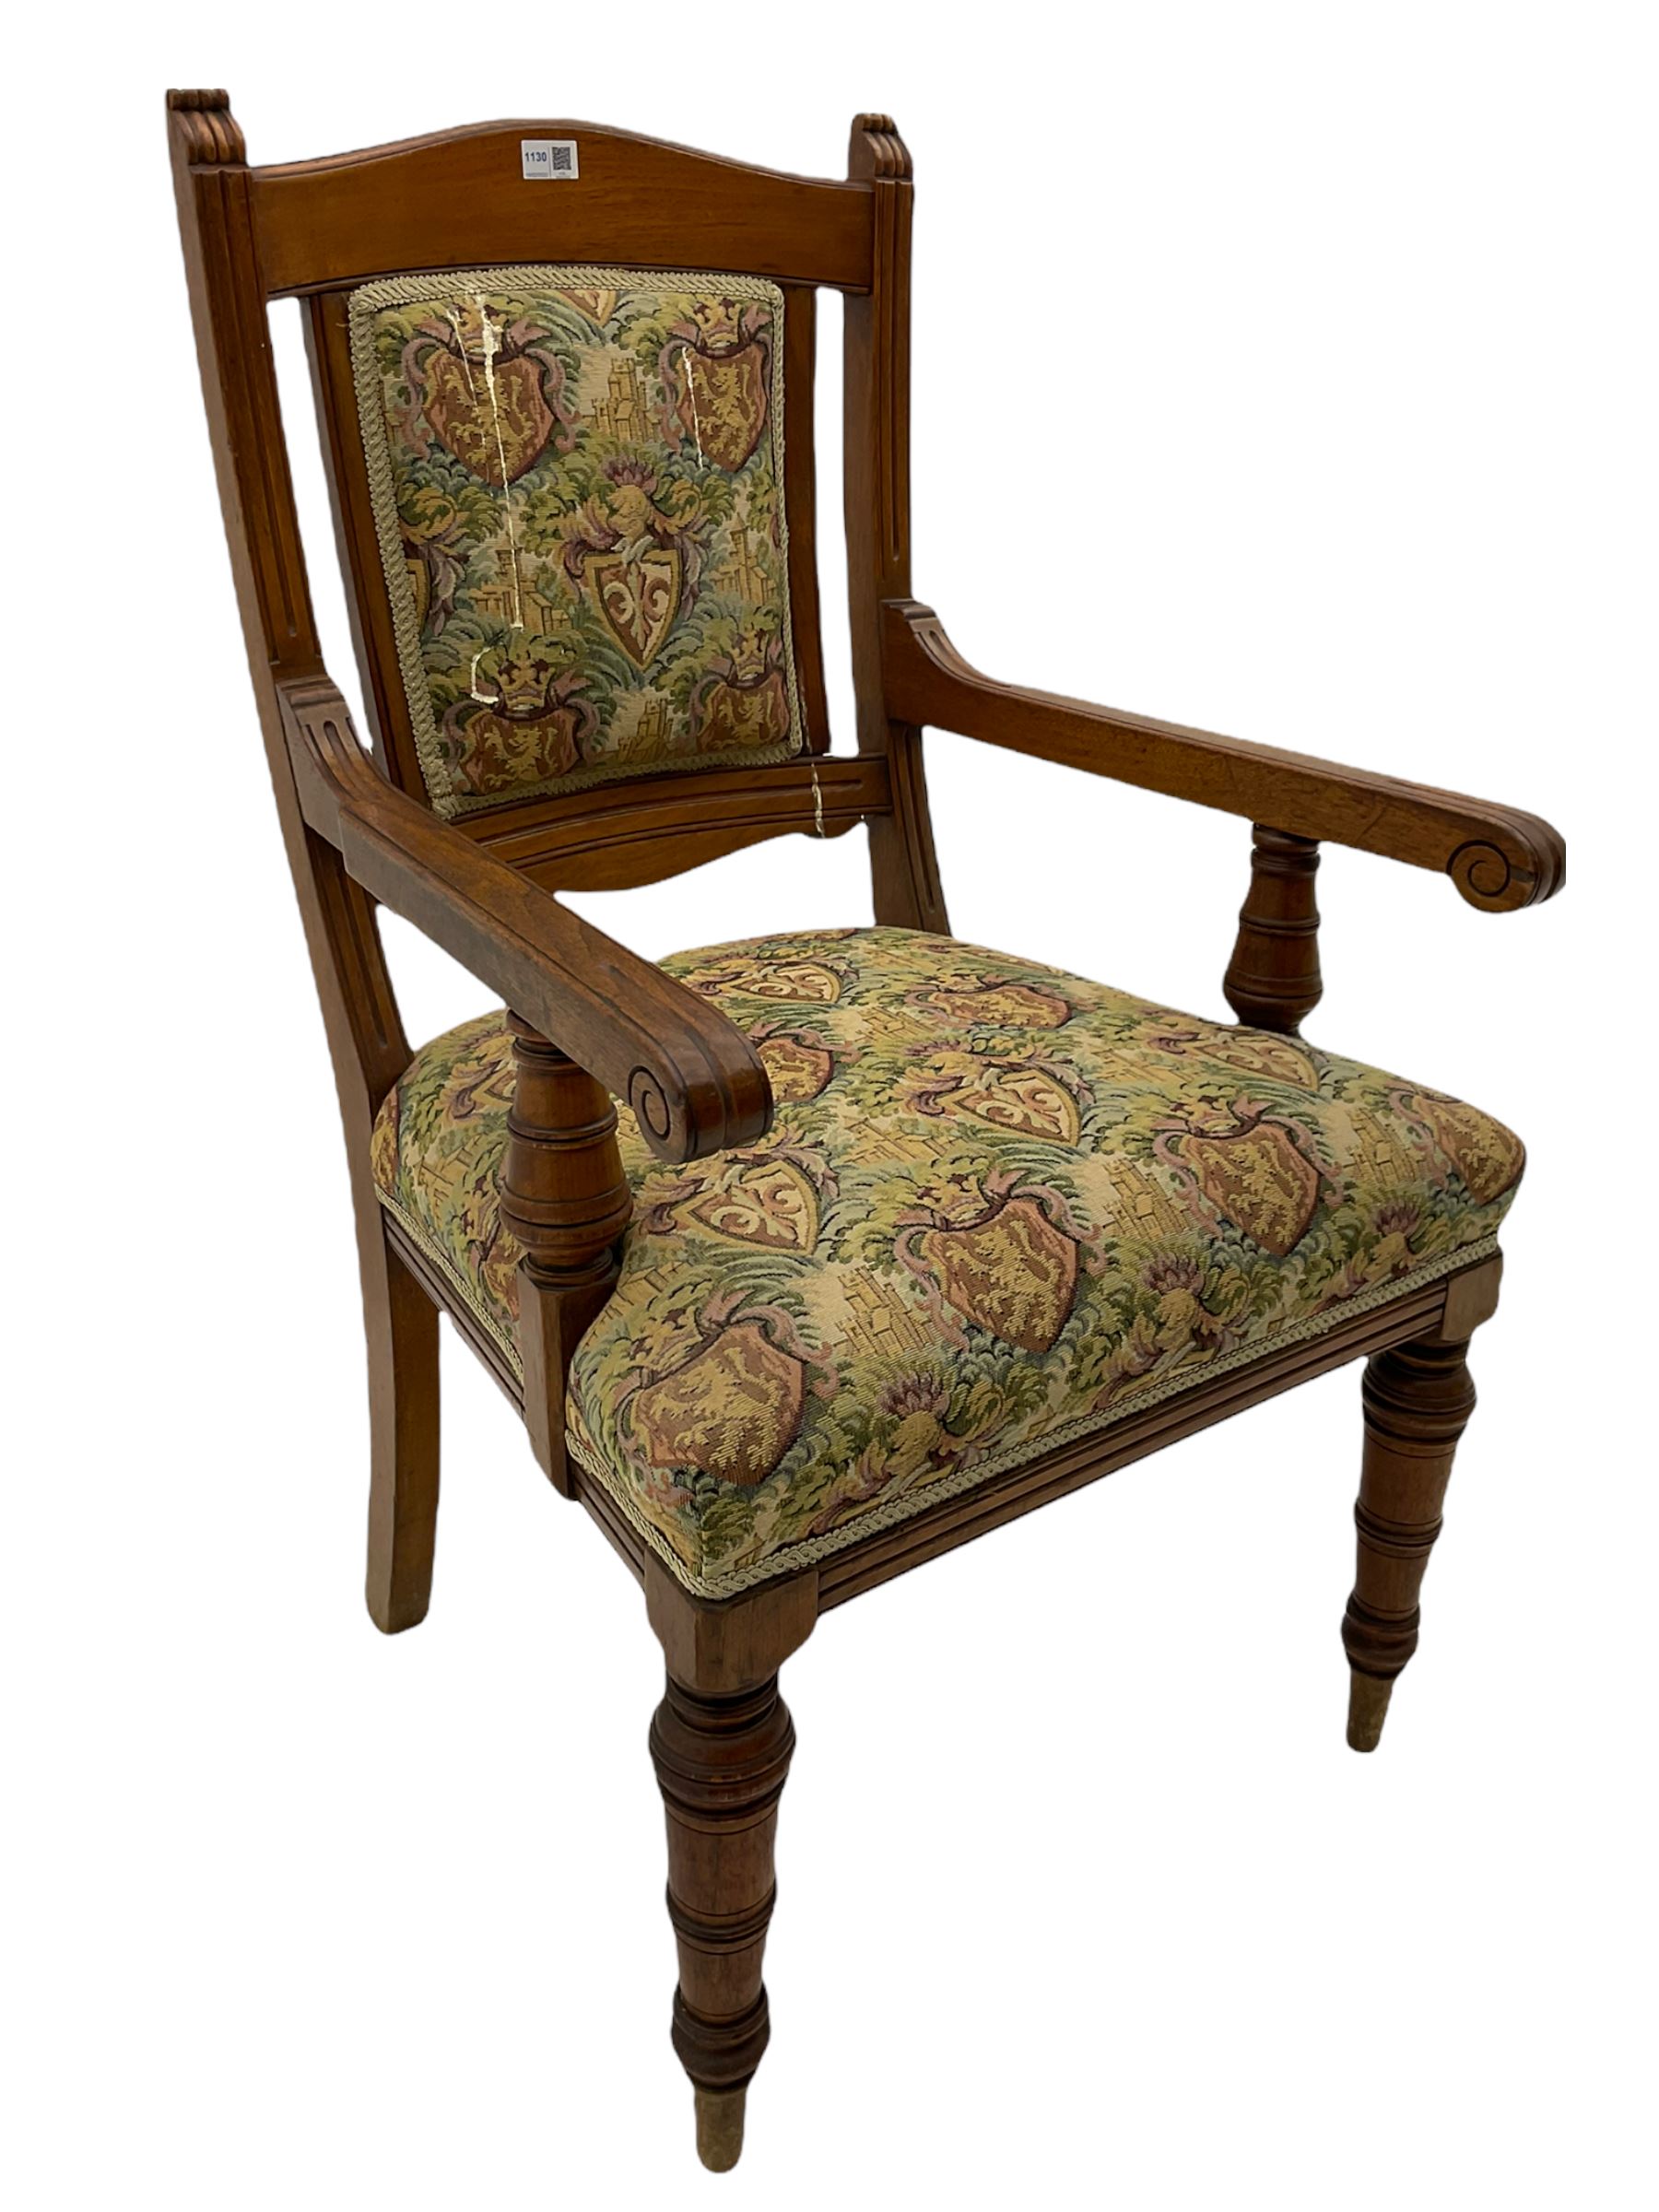 Late Victorian walnut elbow armchair - Image 3 of 6